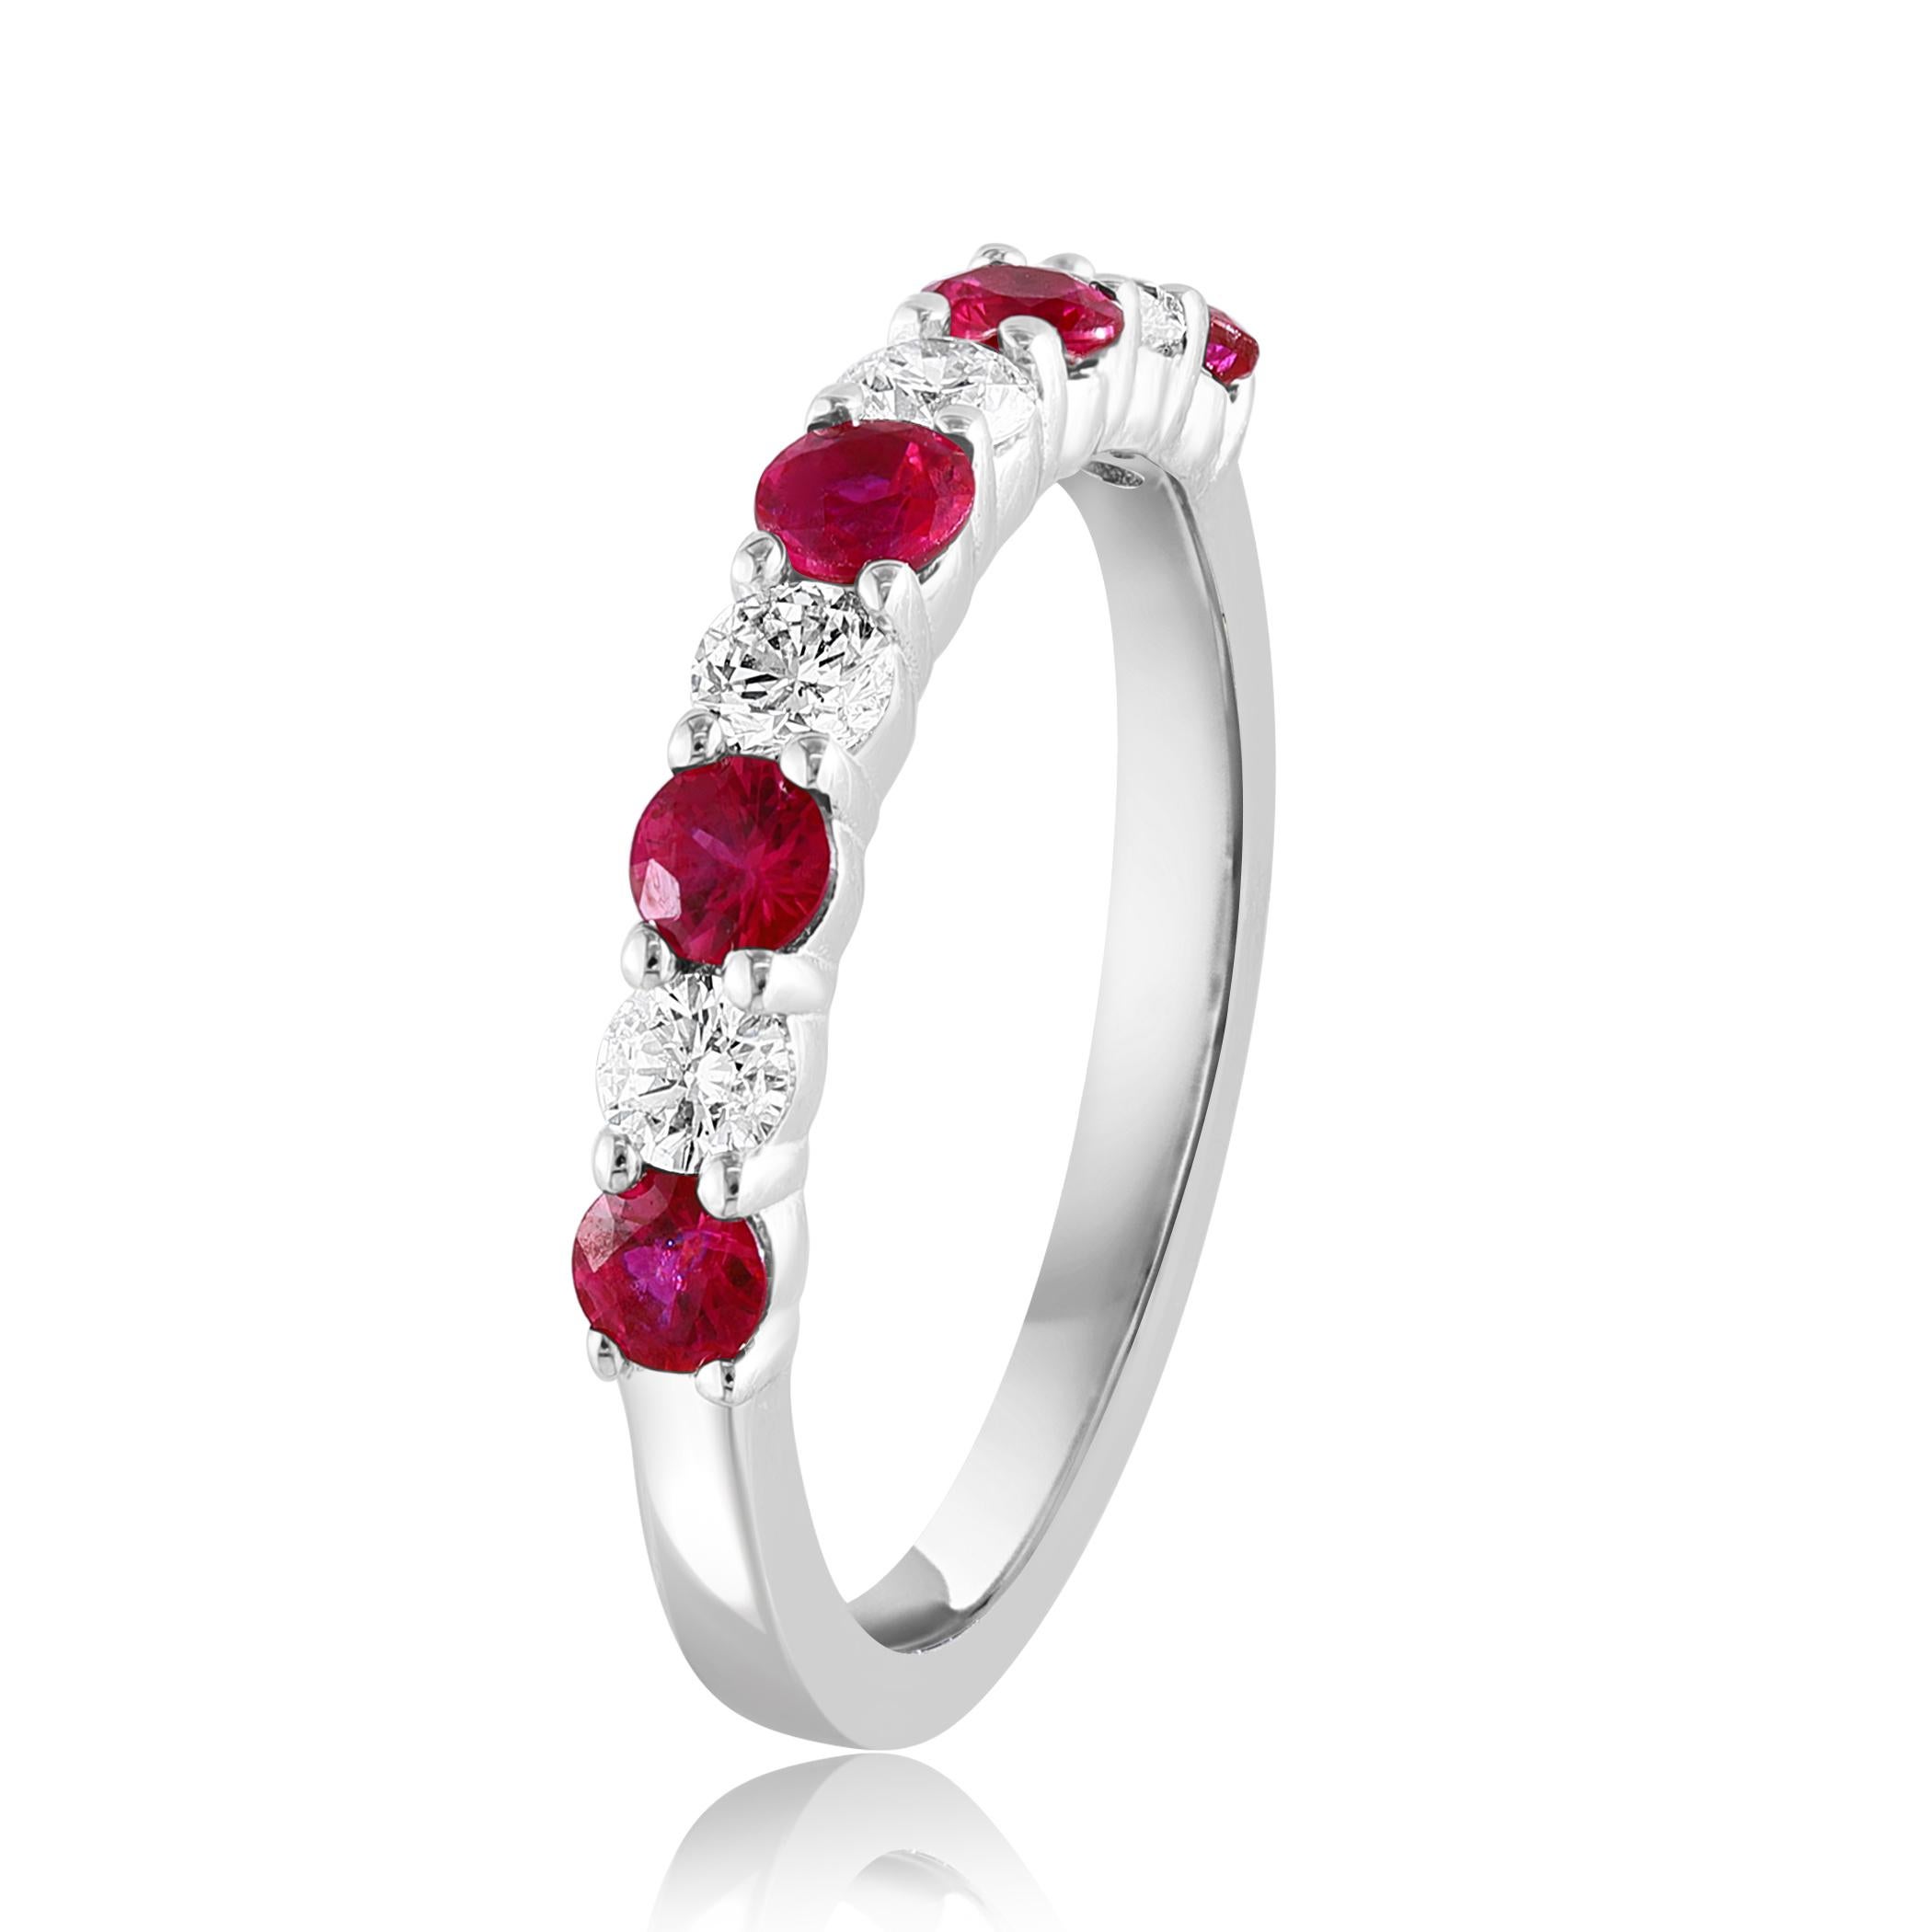 A fashionable and classic wedding band showcasing 4 brilliant cut diamonds weighing 0.37 carats total alternating with 5 round lush rubies weighing 0.46 carats. Stones secured with a shared 4 prong setting made with 14K white gold. A versatile piece